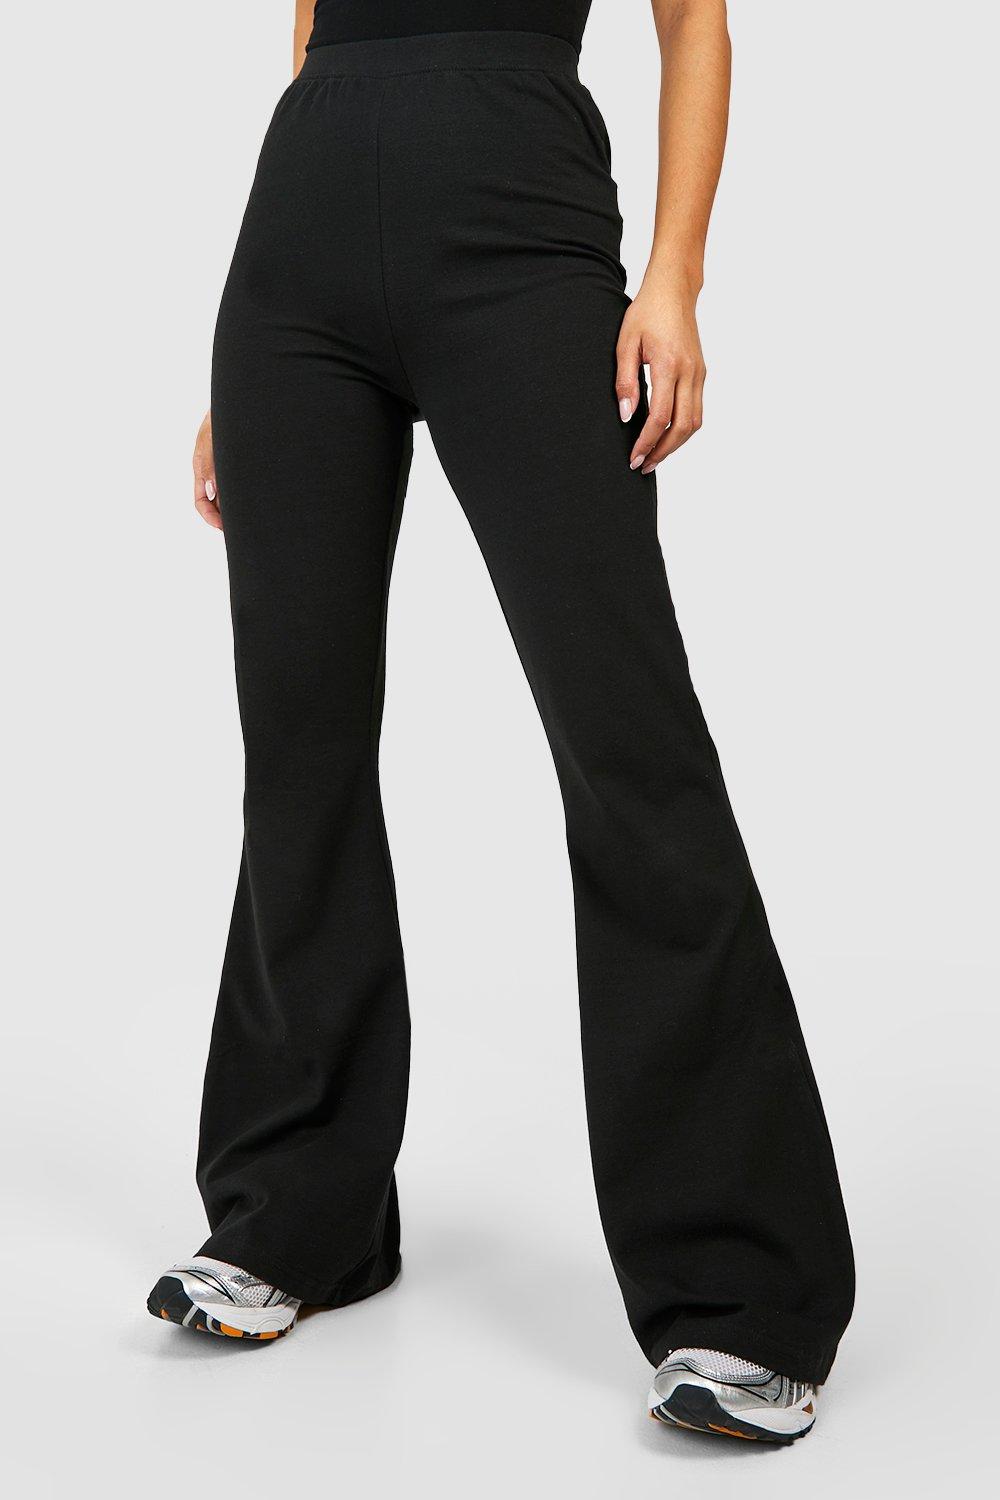 Cotton Black High Waisted Flared Pants